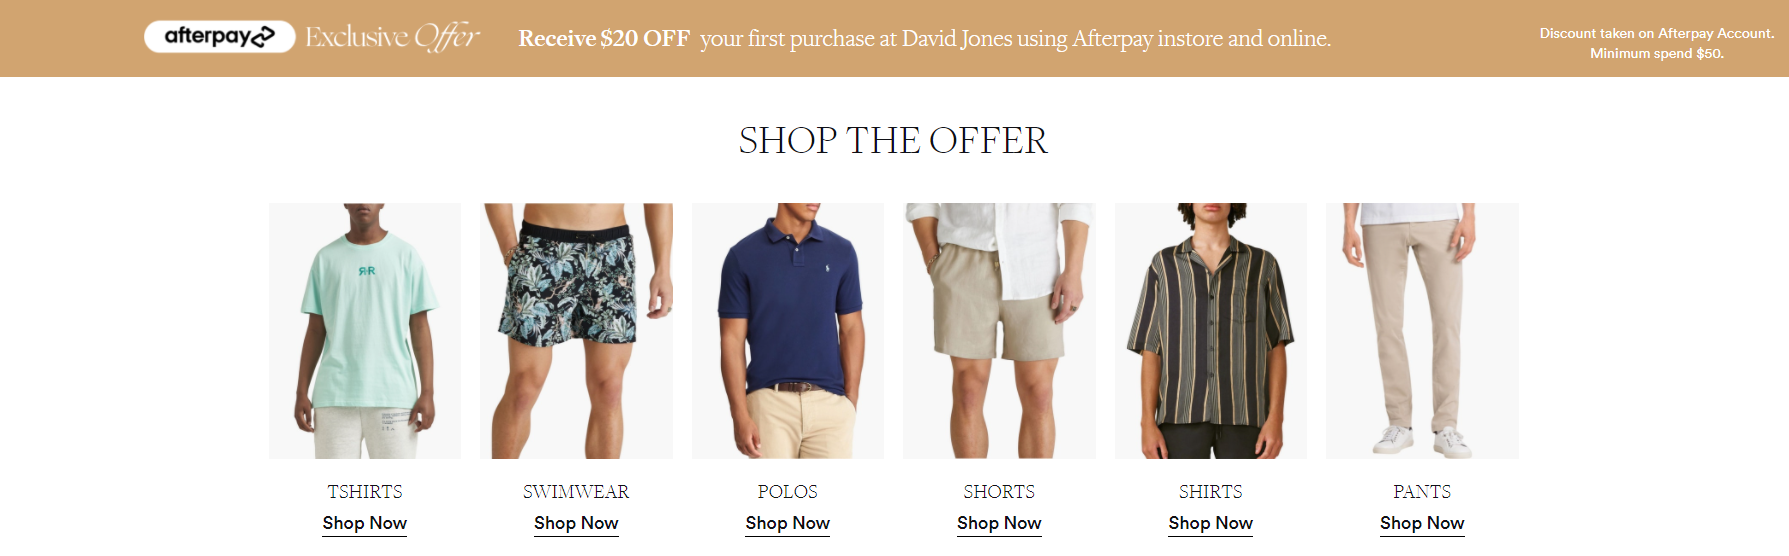 Receive $20 OFF $50 your first purchase with Afterpay at David Jones